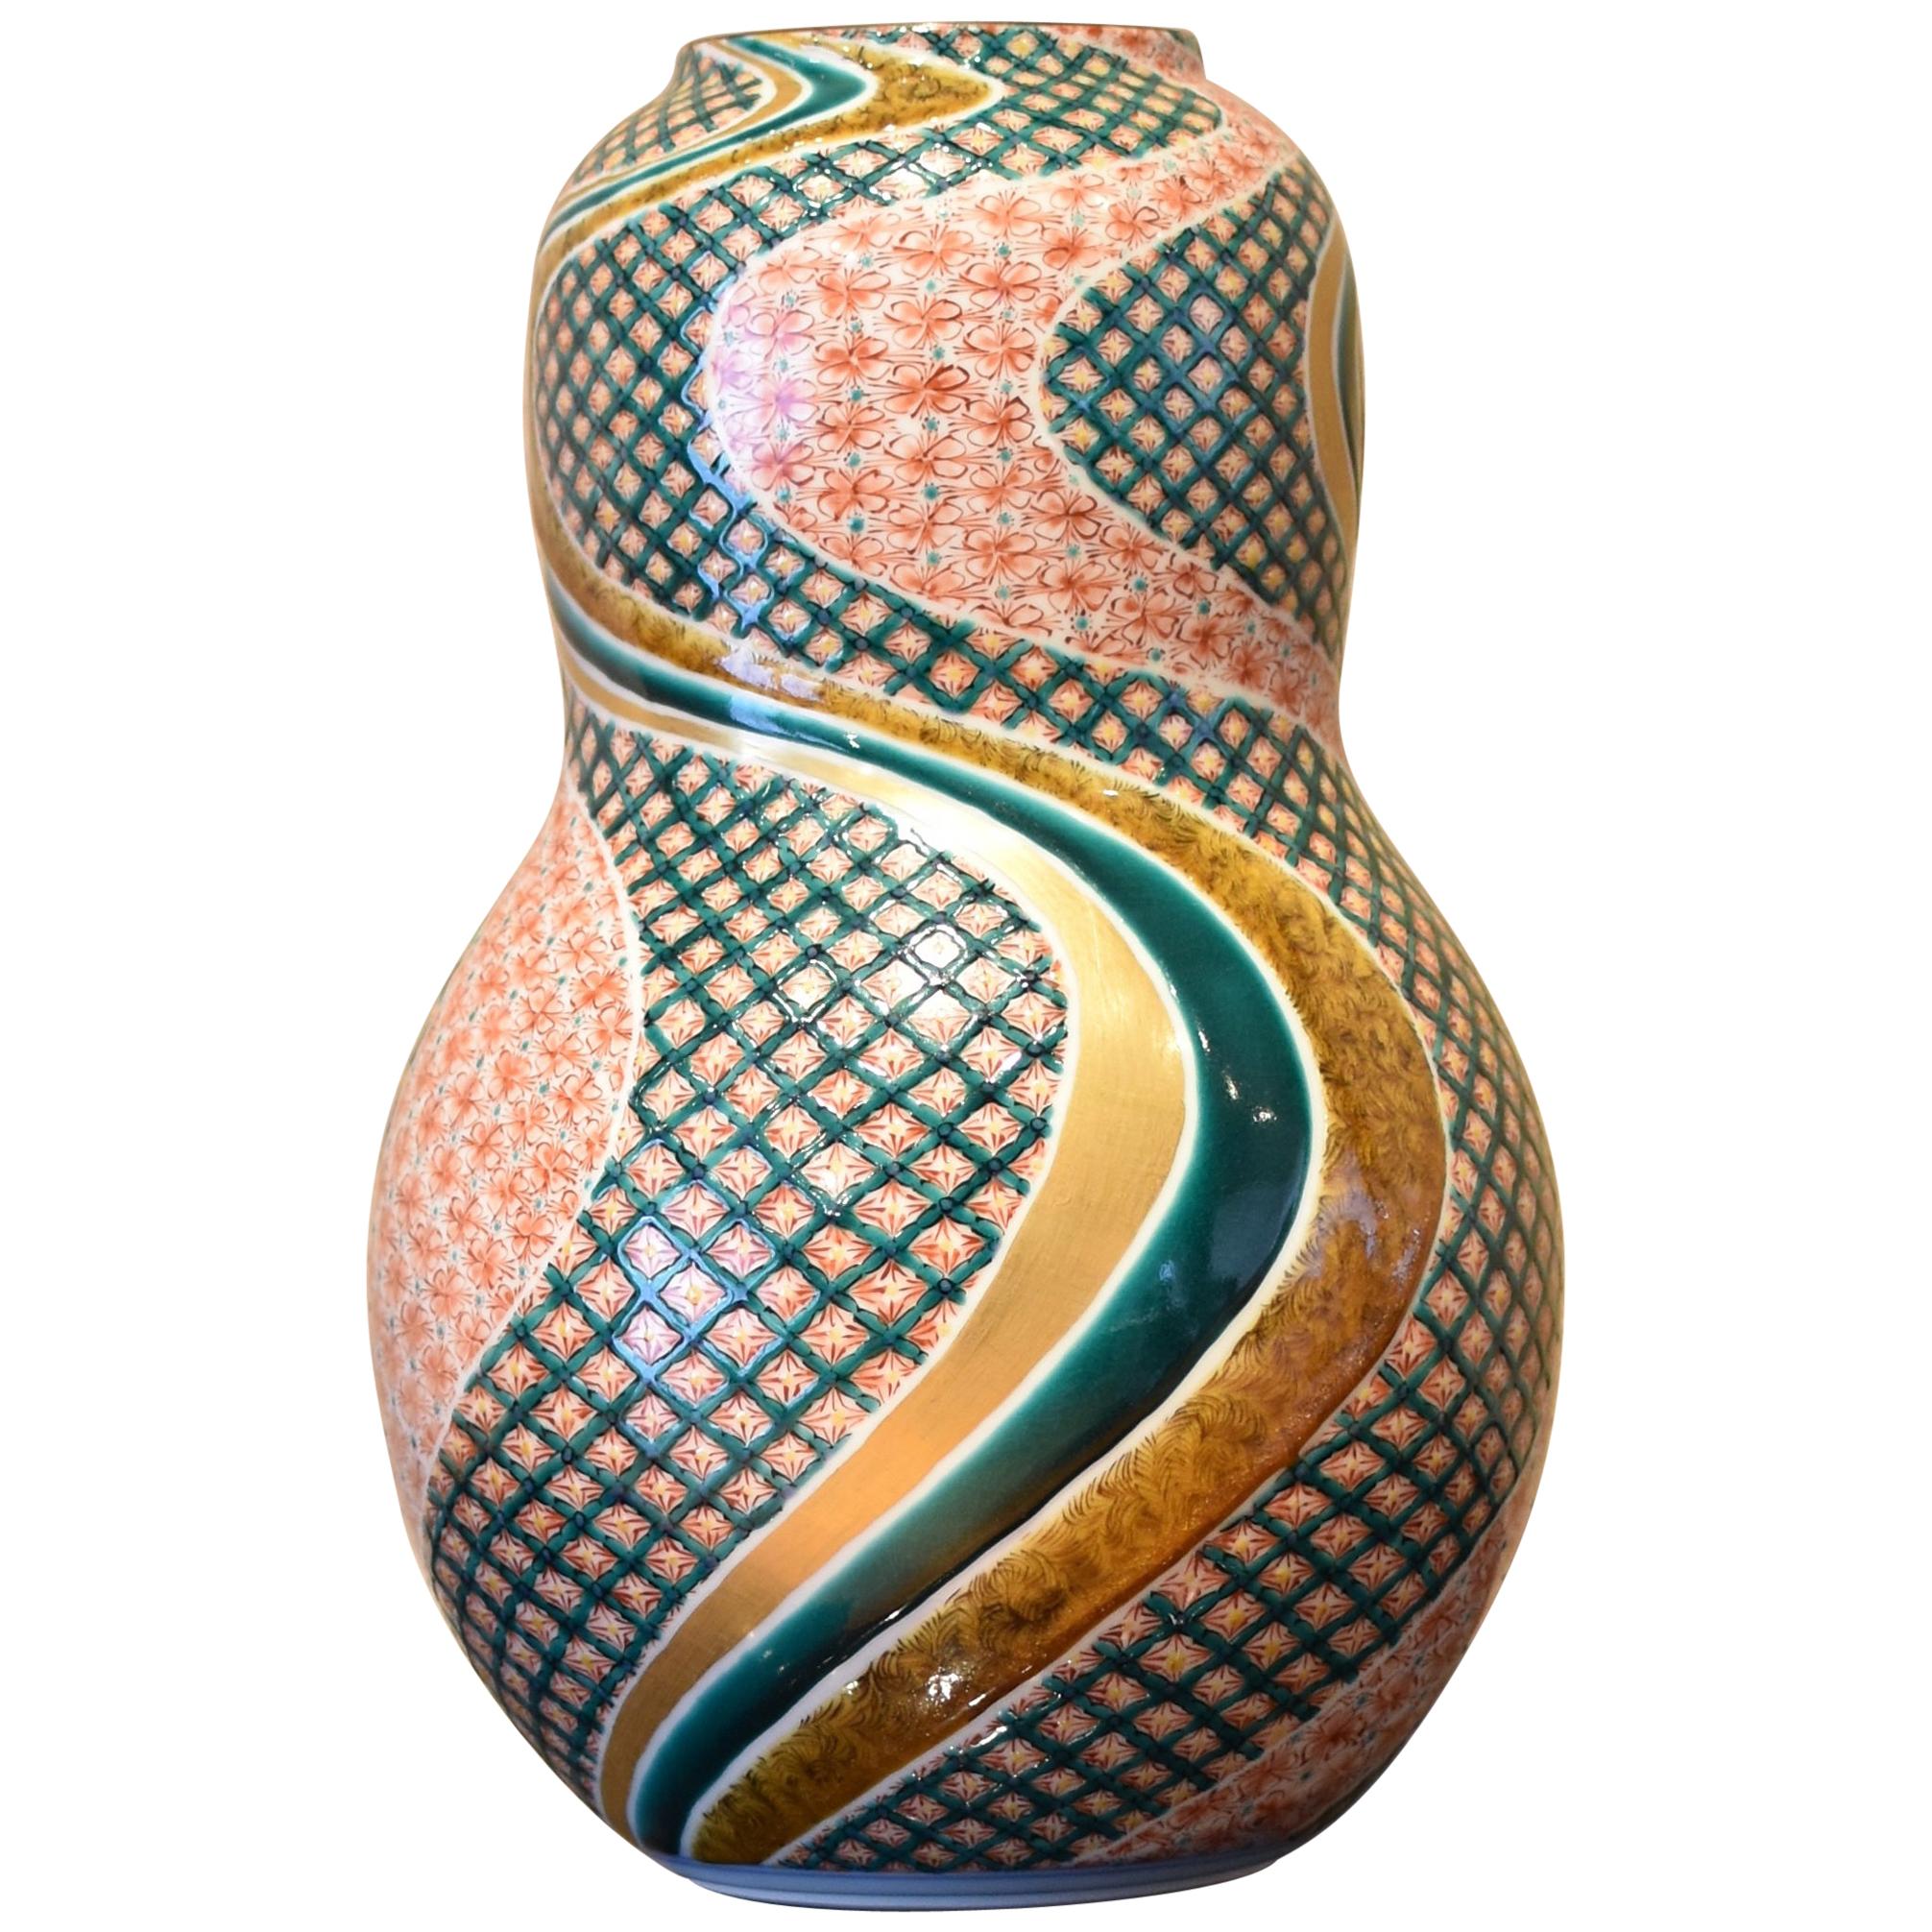 Japanese Contemporary Green Red Gold Porcelain Vase by Master Artist For Sale